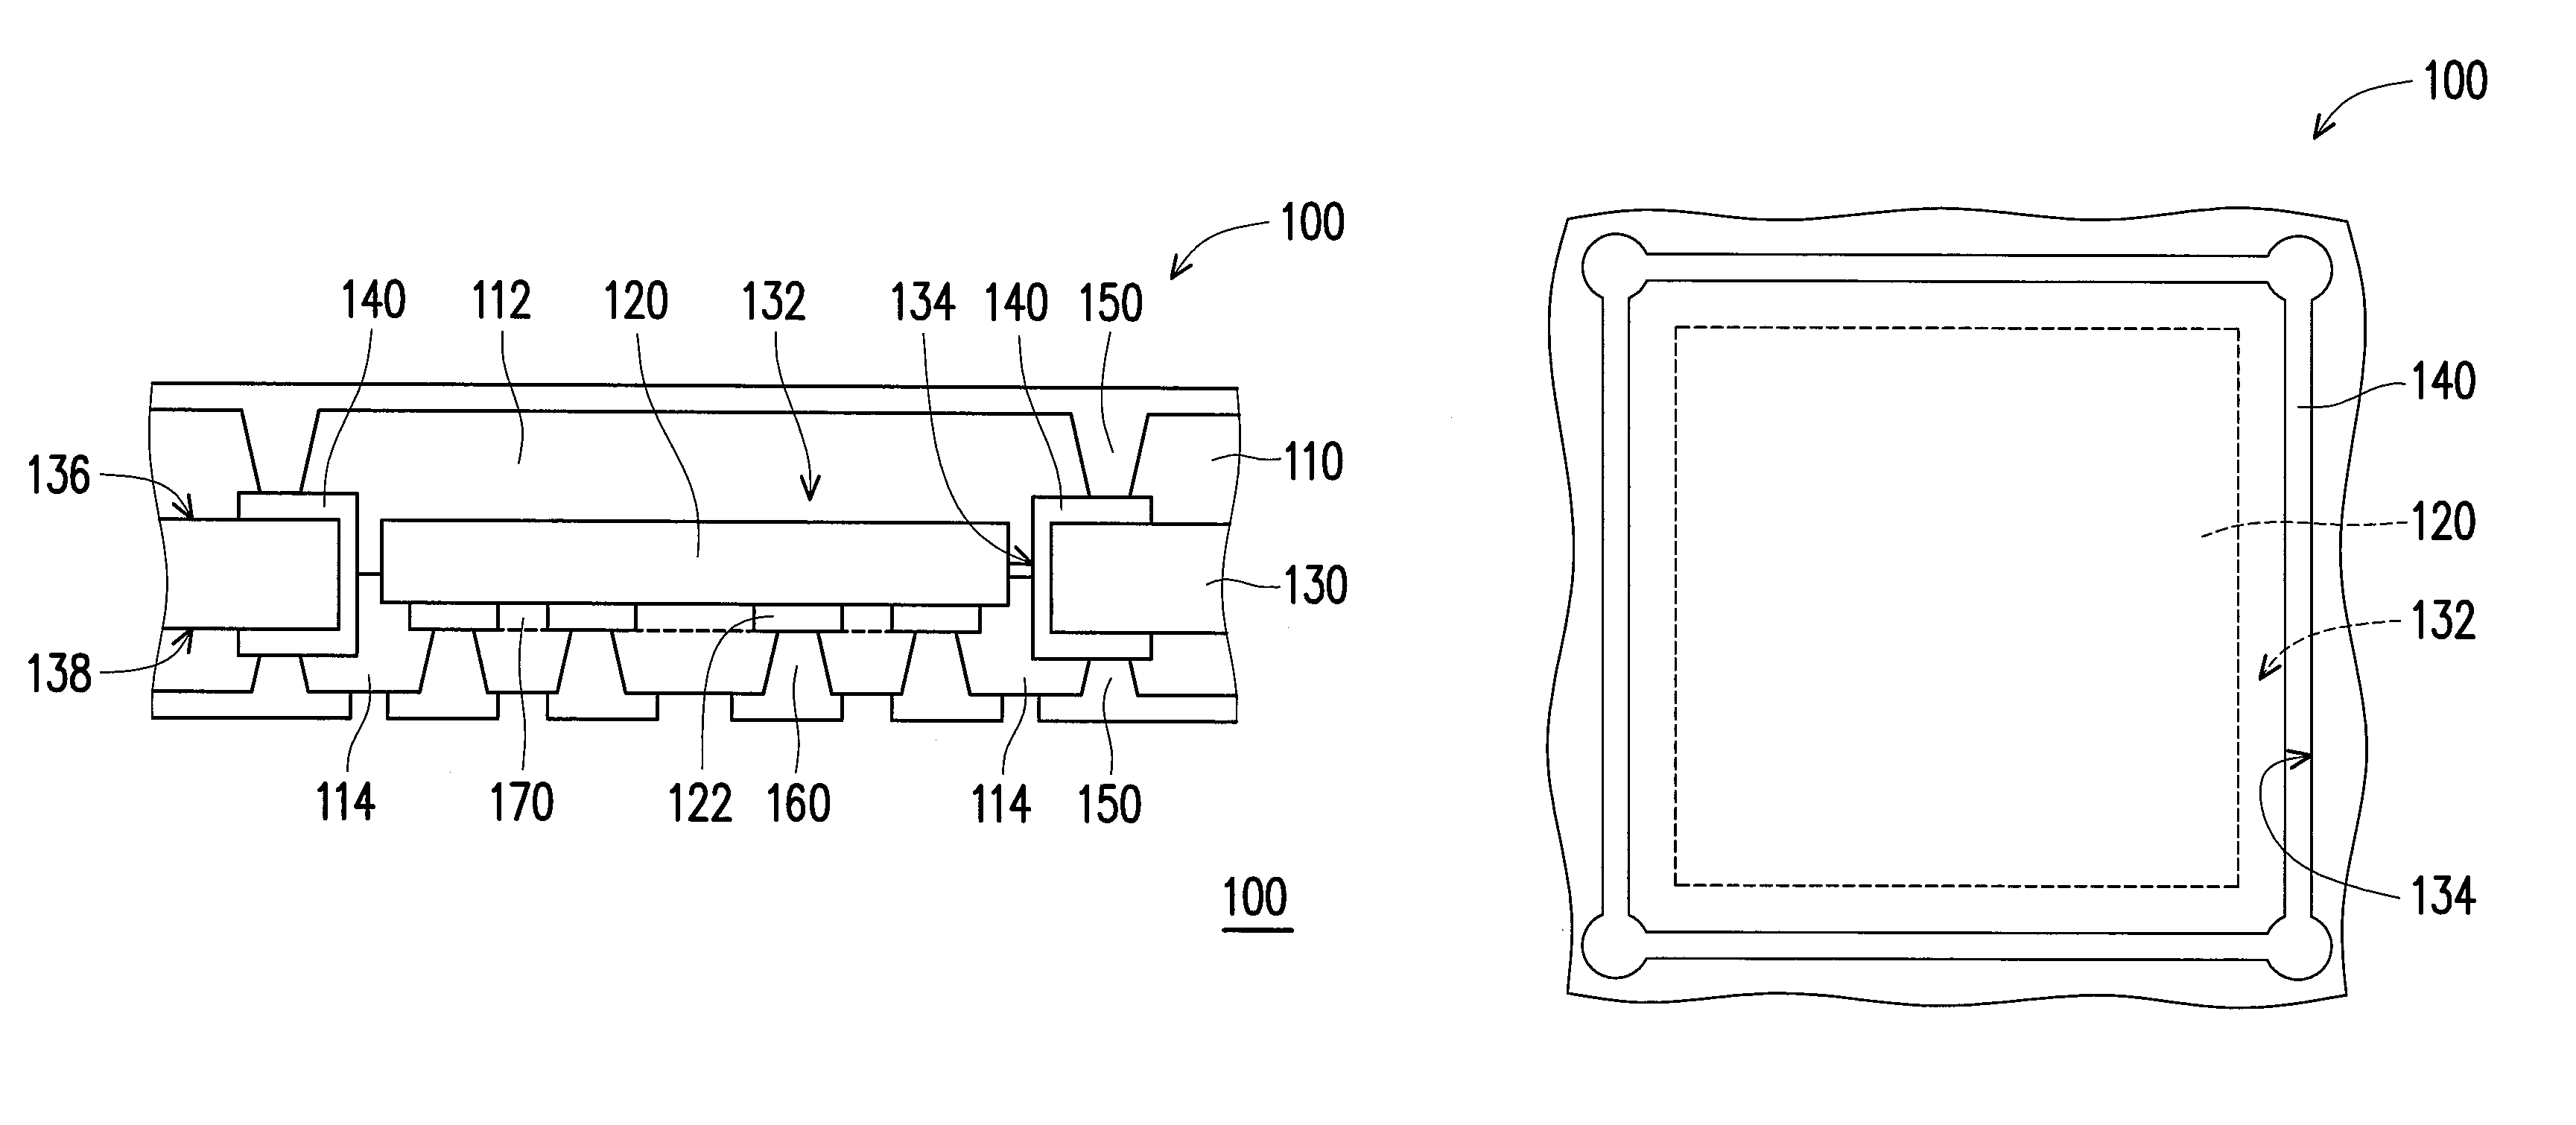 Embedded electronic device package structure